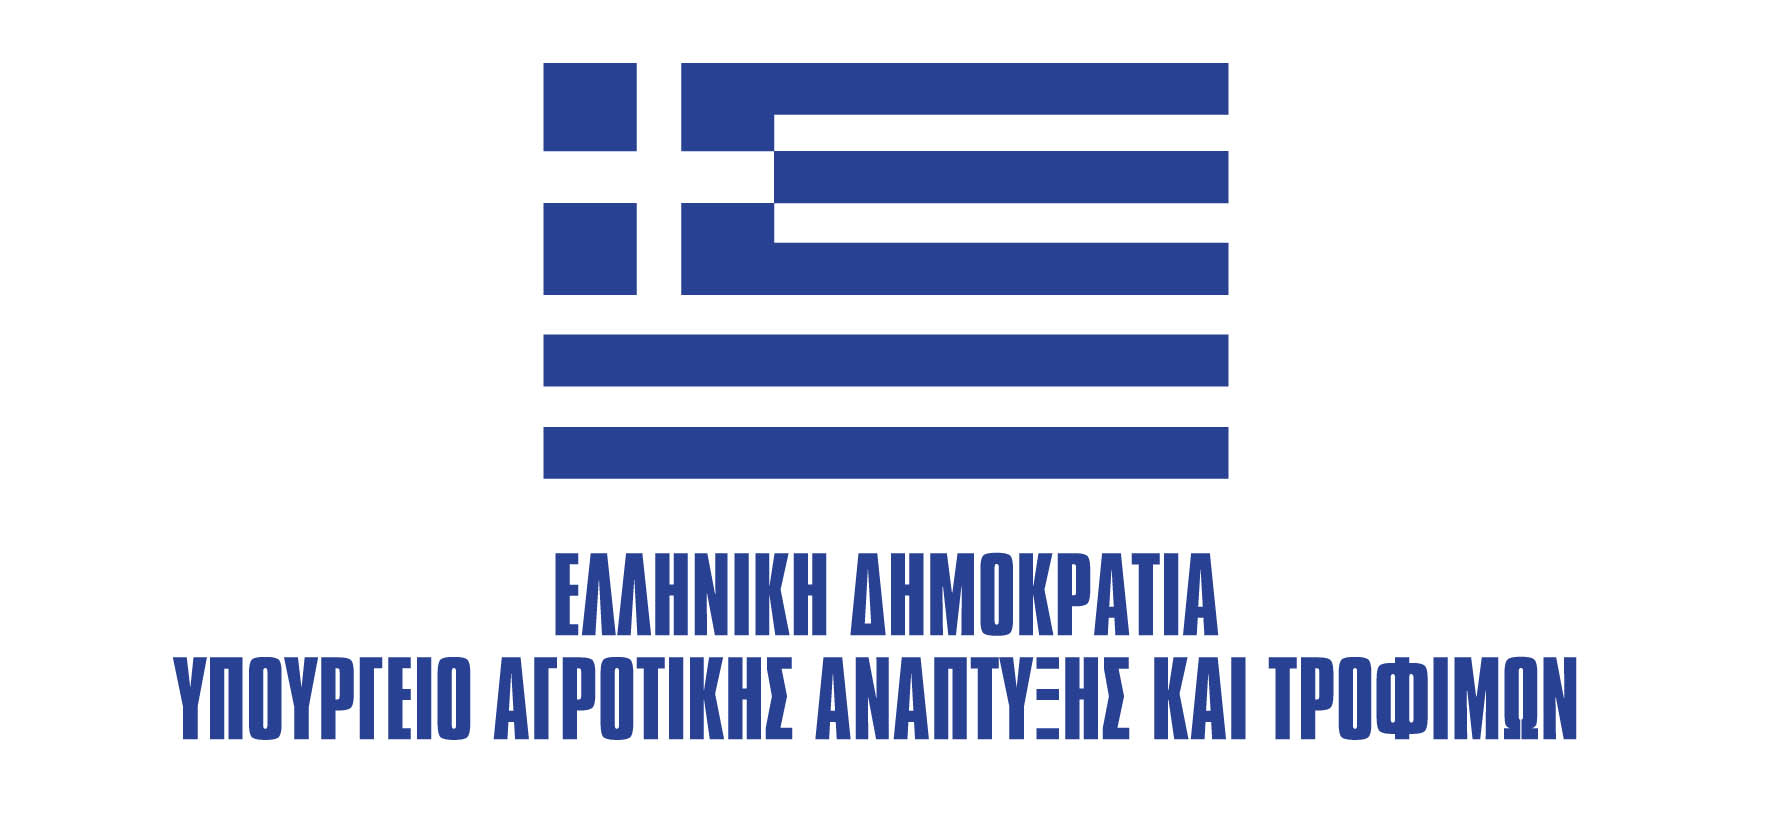 2. logoΥΠΑΑΤ